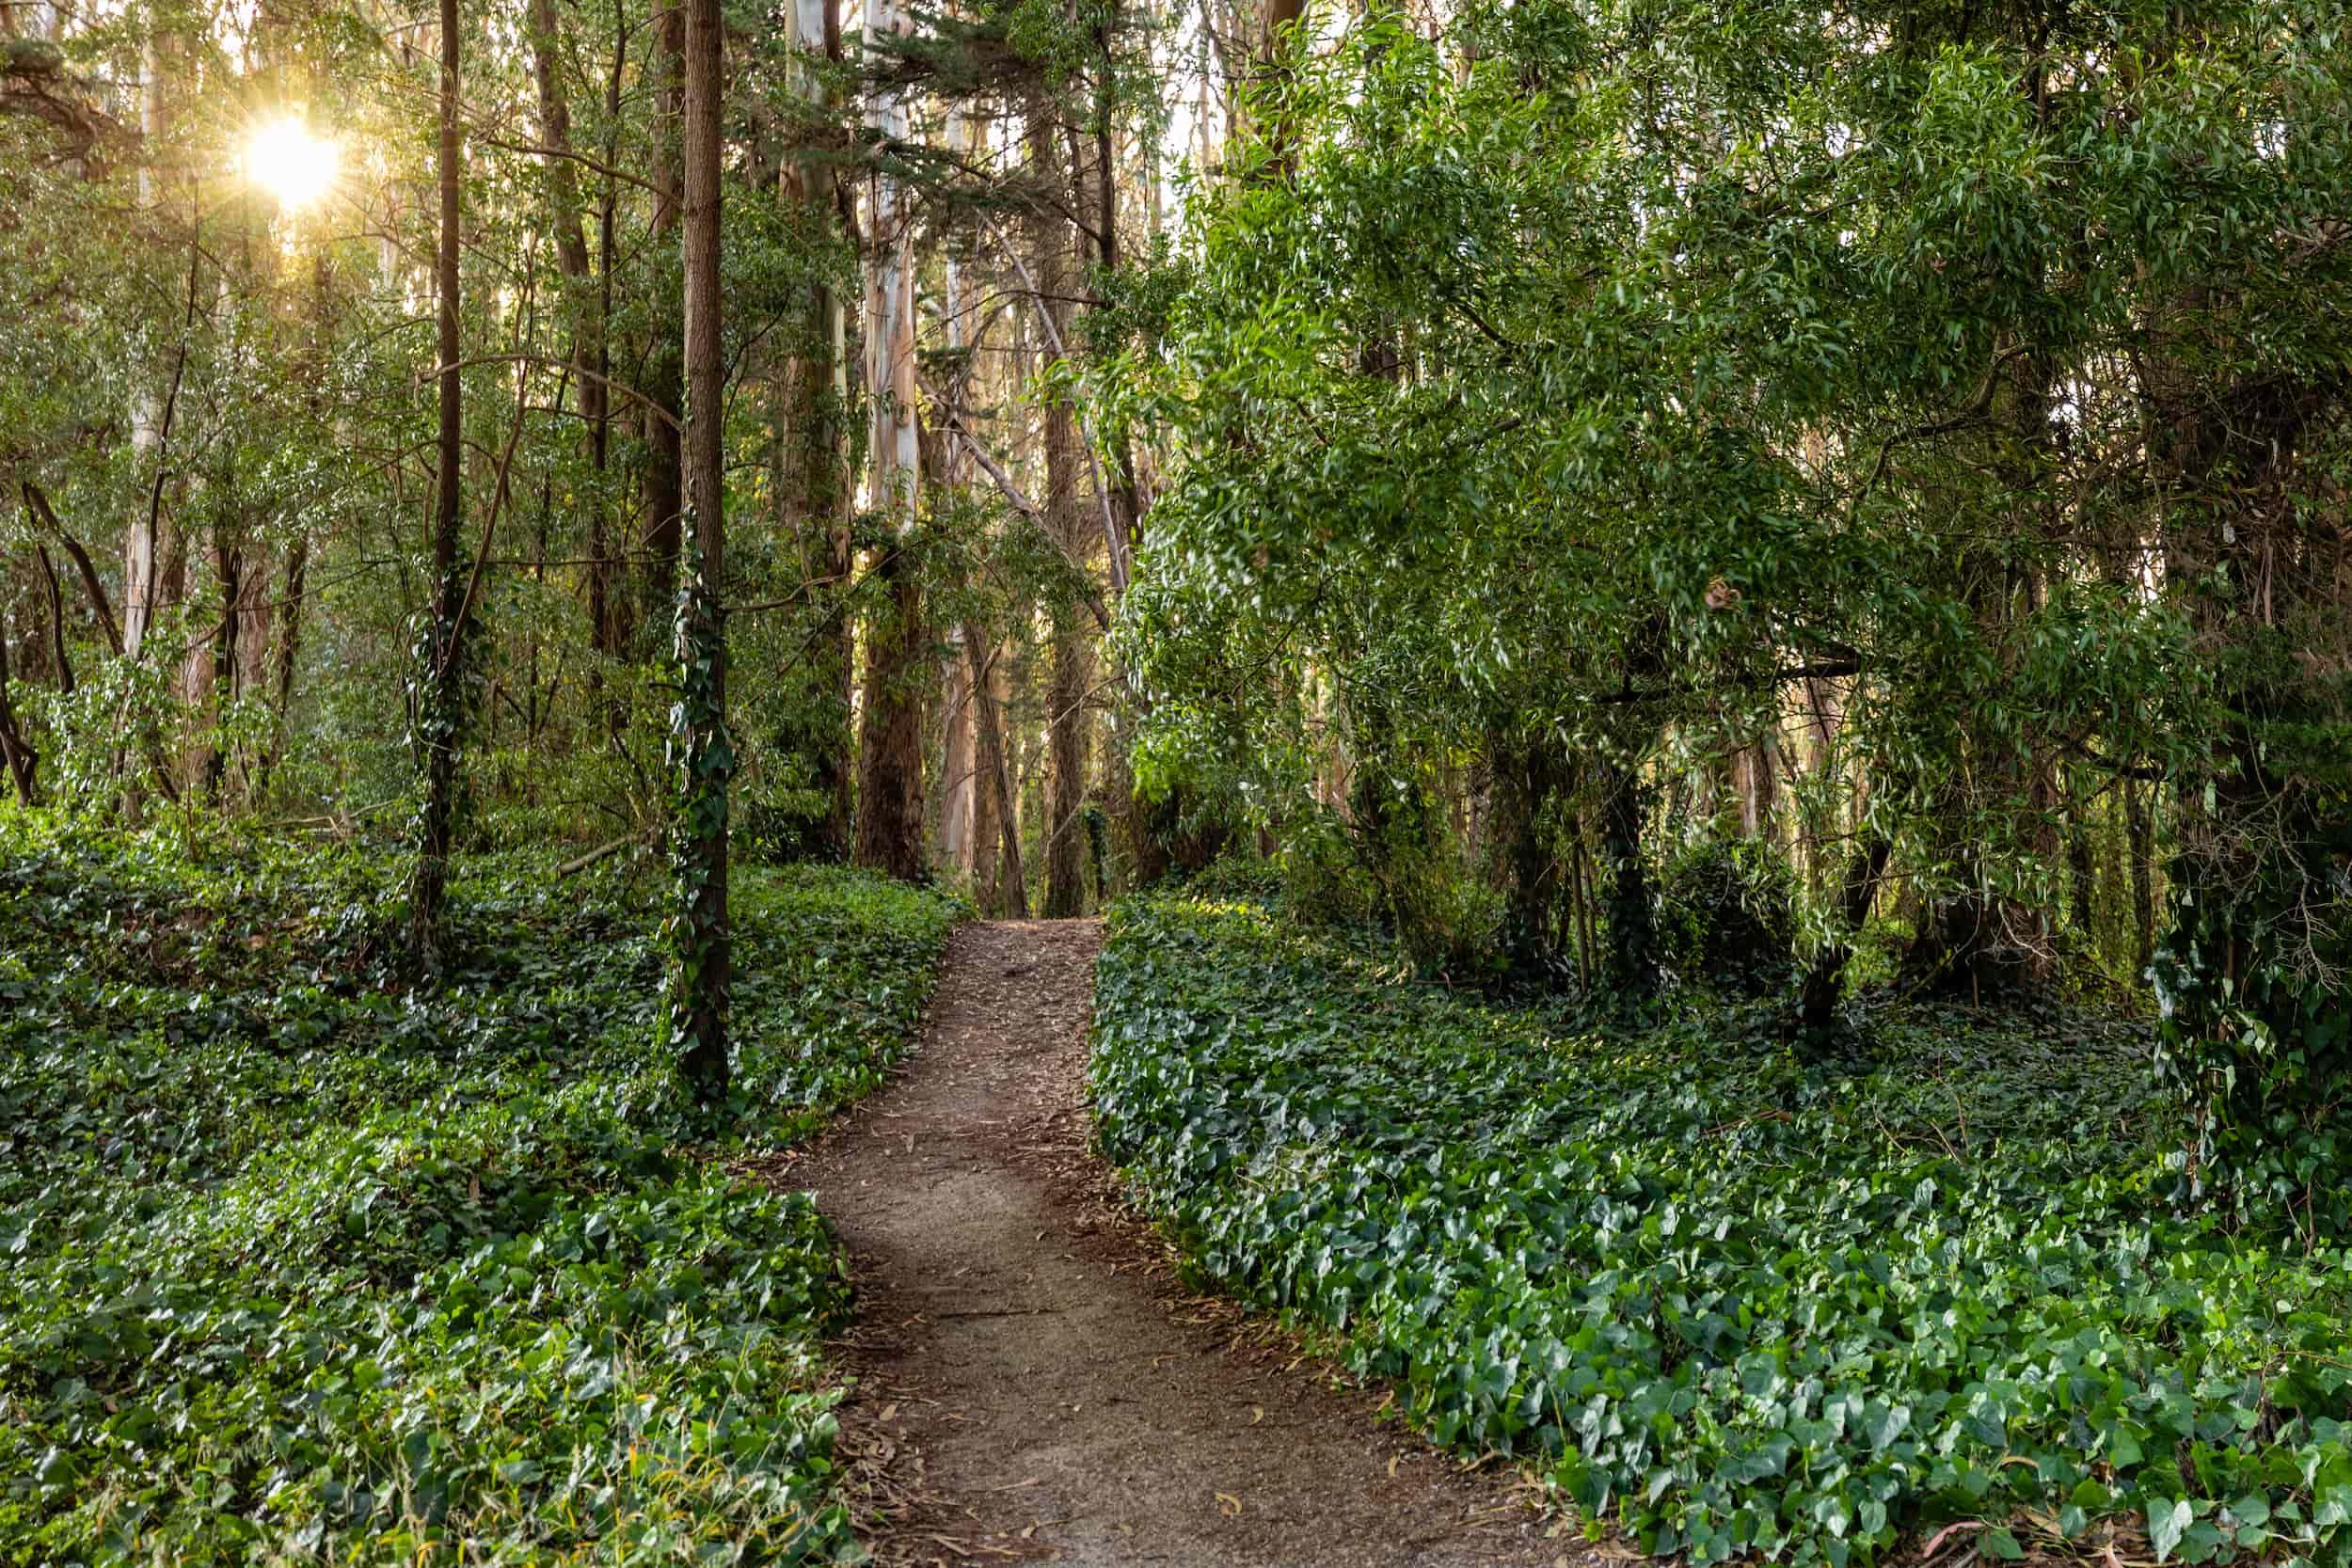 The trail passes through the Presidio’s forest. Photo by Charity Vargas.